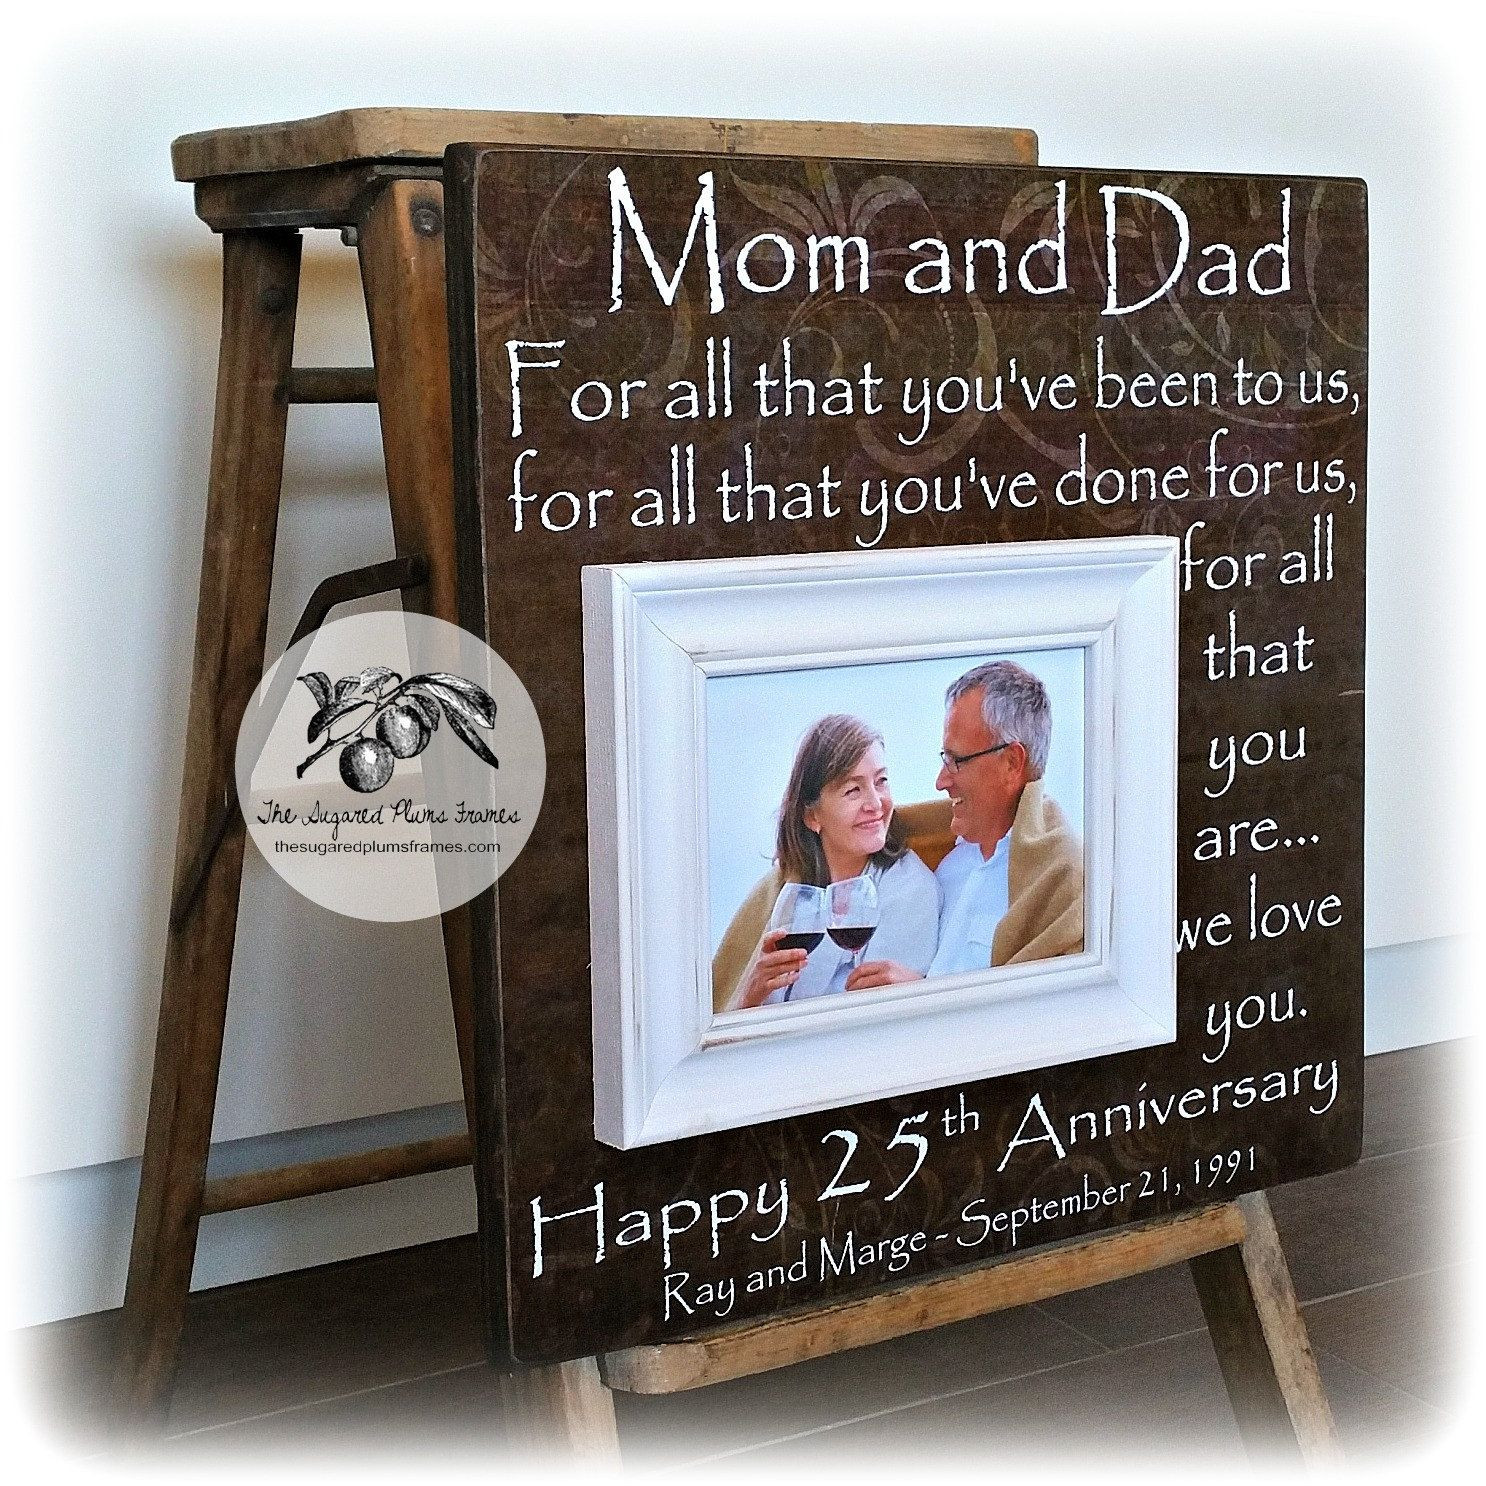 Best Gift Ideas For Parents
 25th Anniversary Gifts for Parents Silver Anniversary